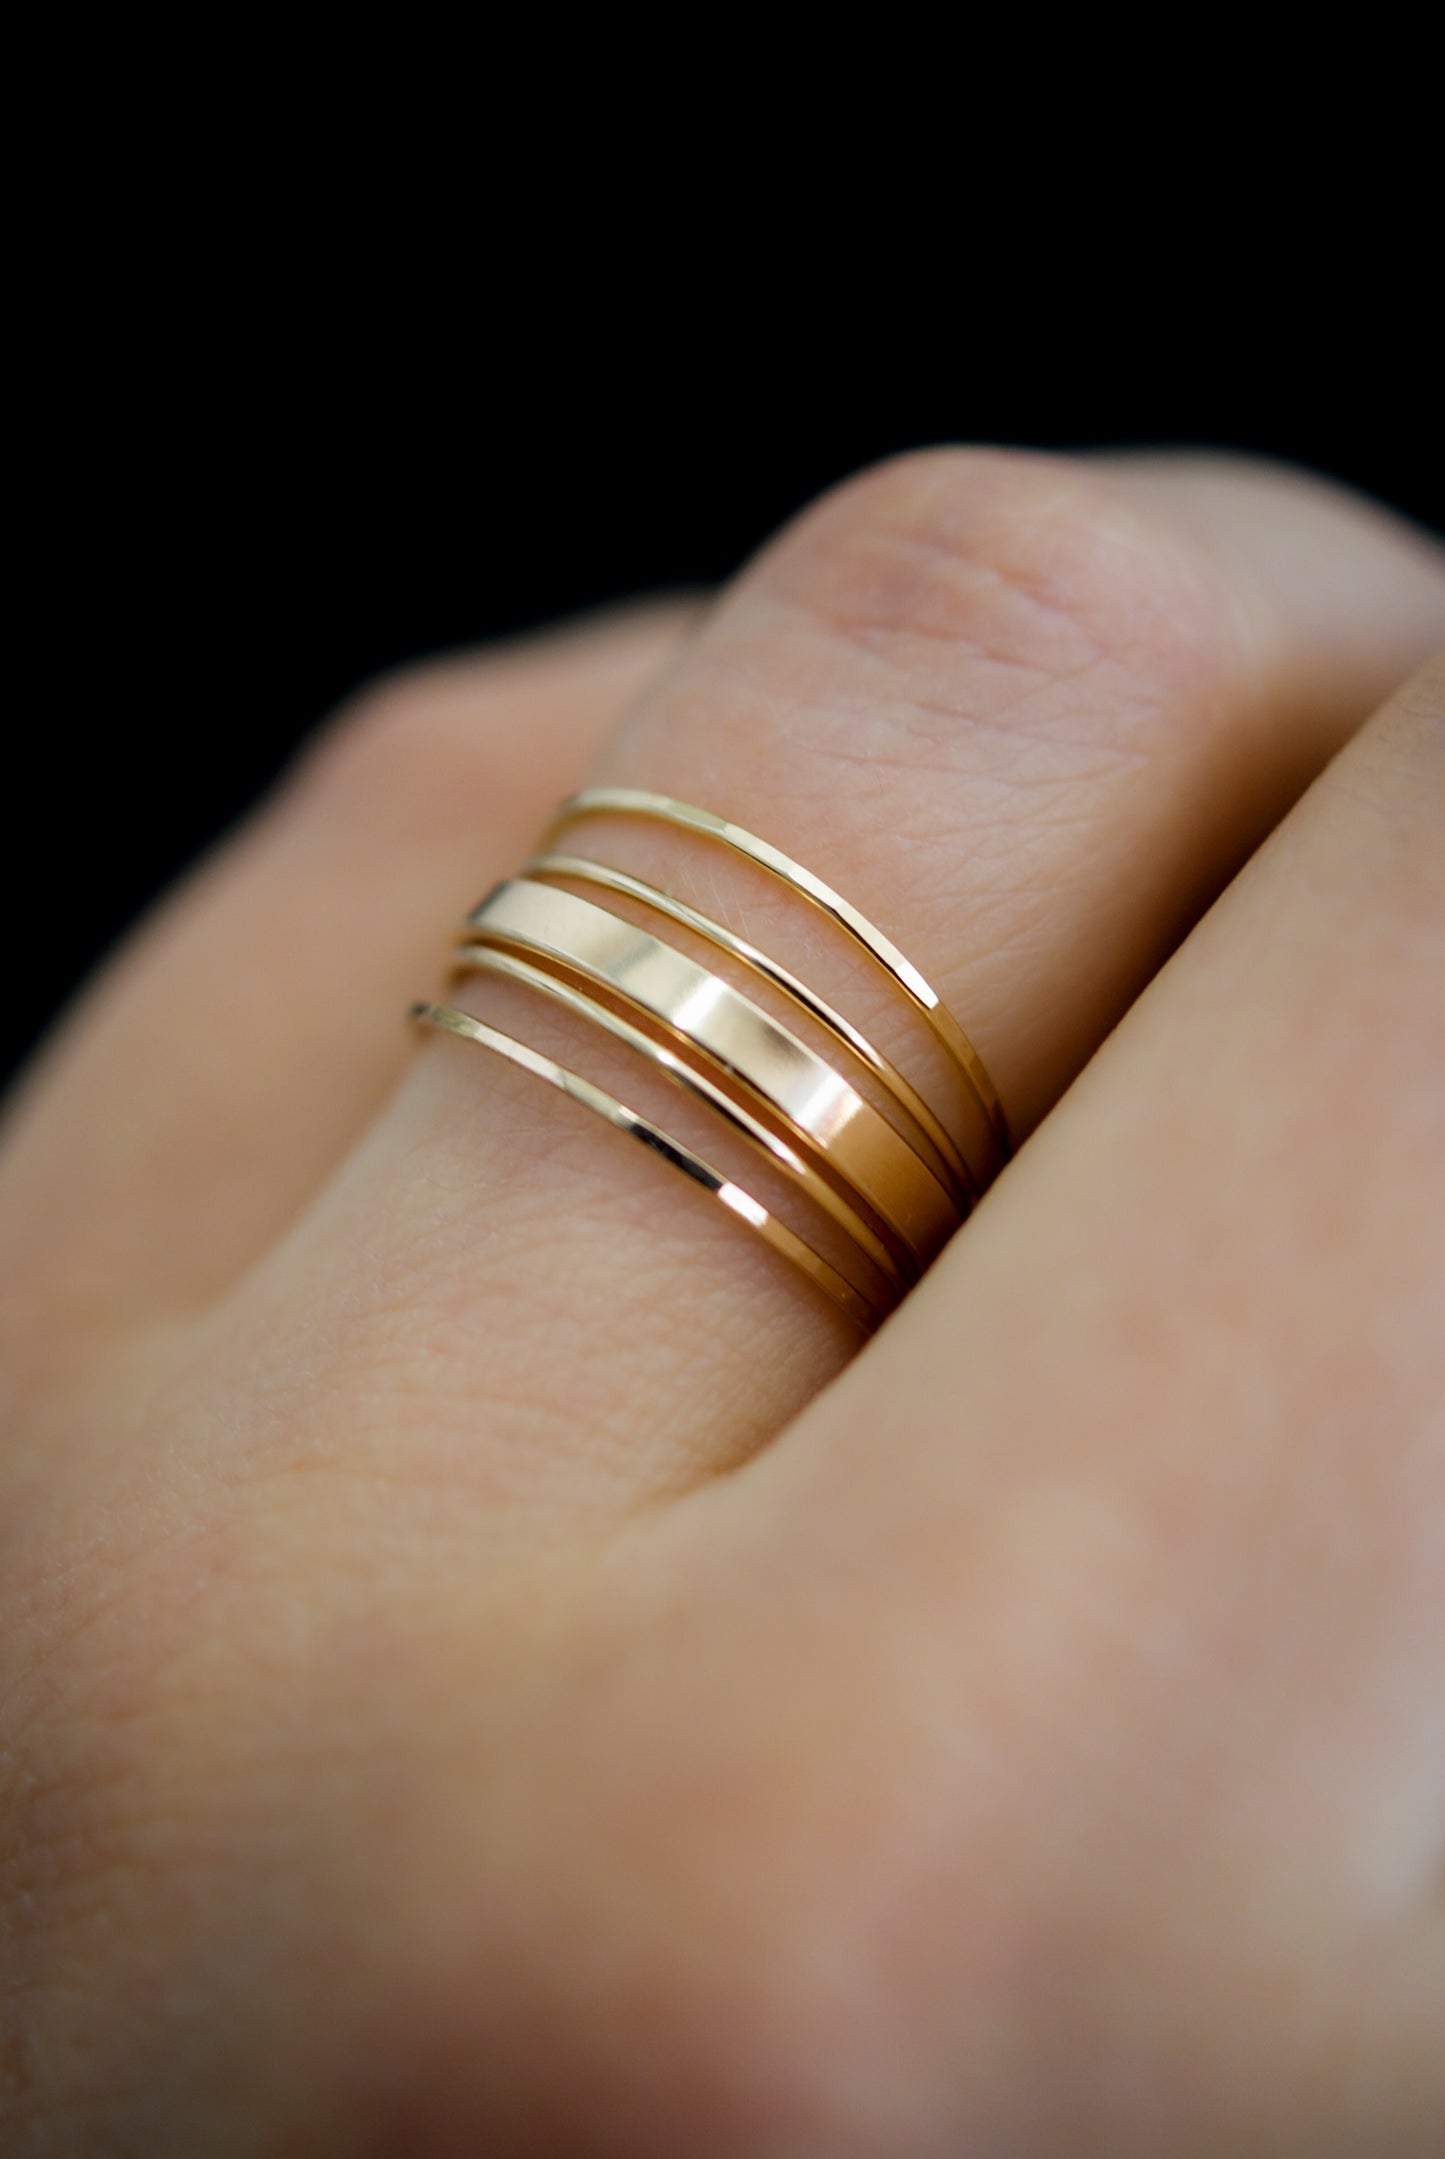 Mirrored Ultra Thin Set of 5 Stacking Rings, Gold Fill, Rose Gold Fill or Sterling Silver